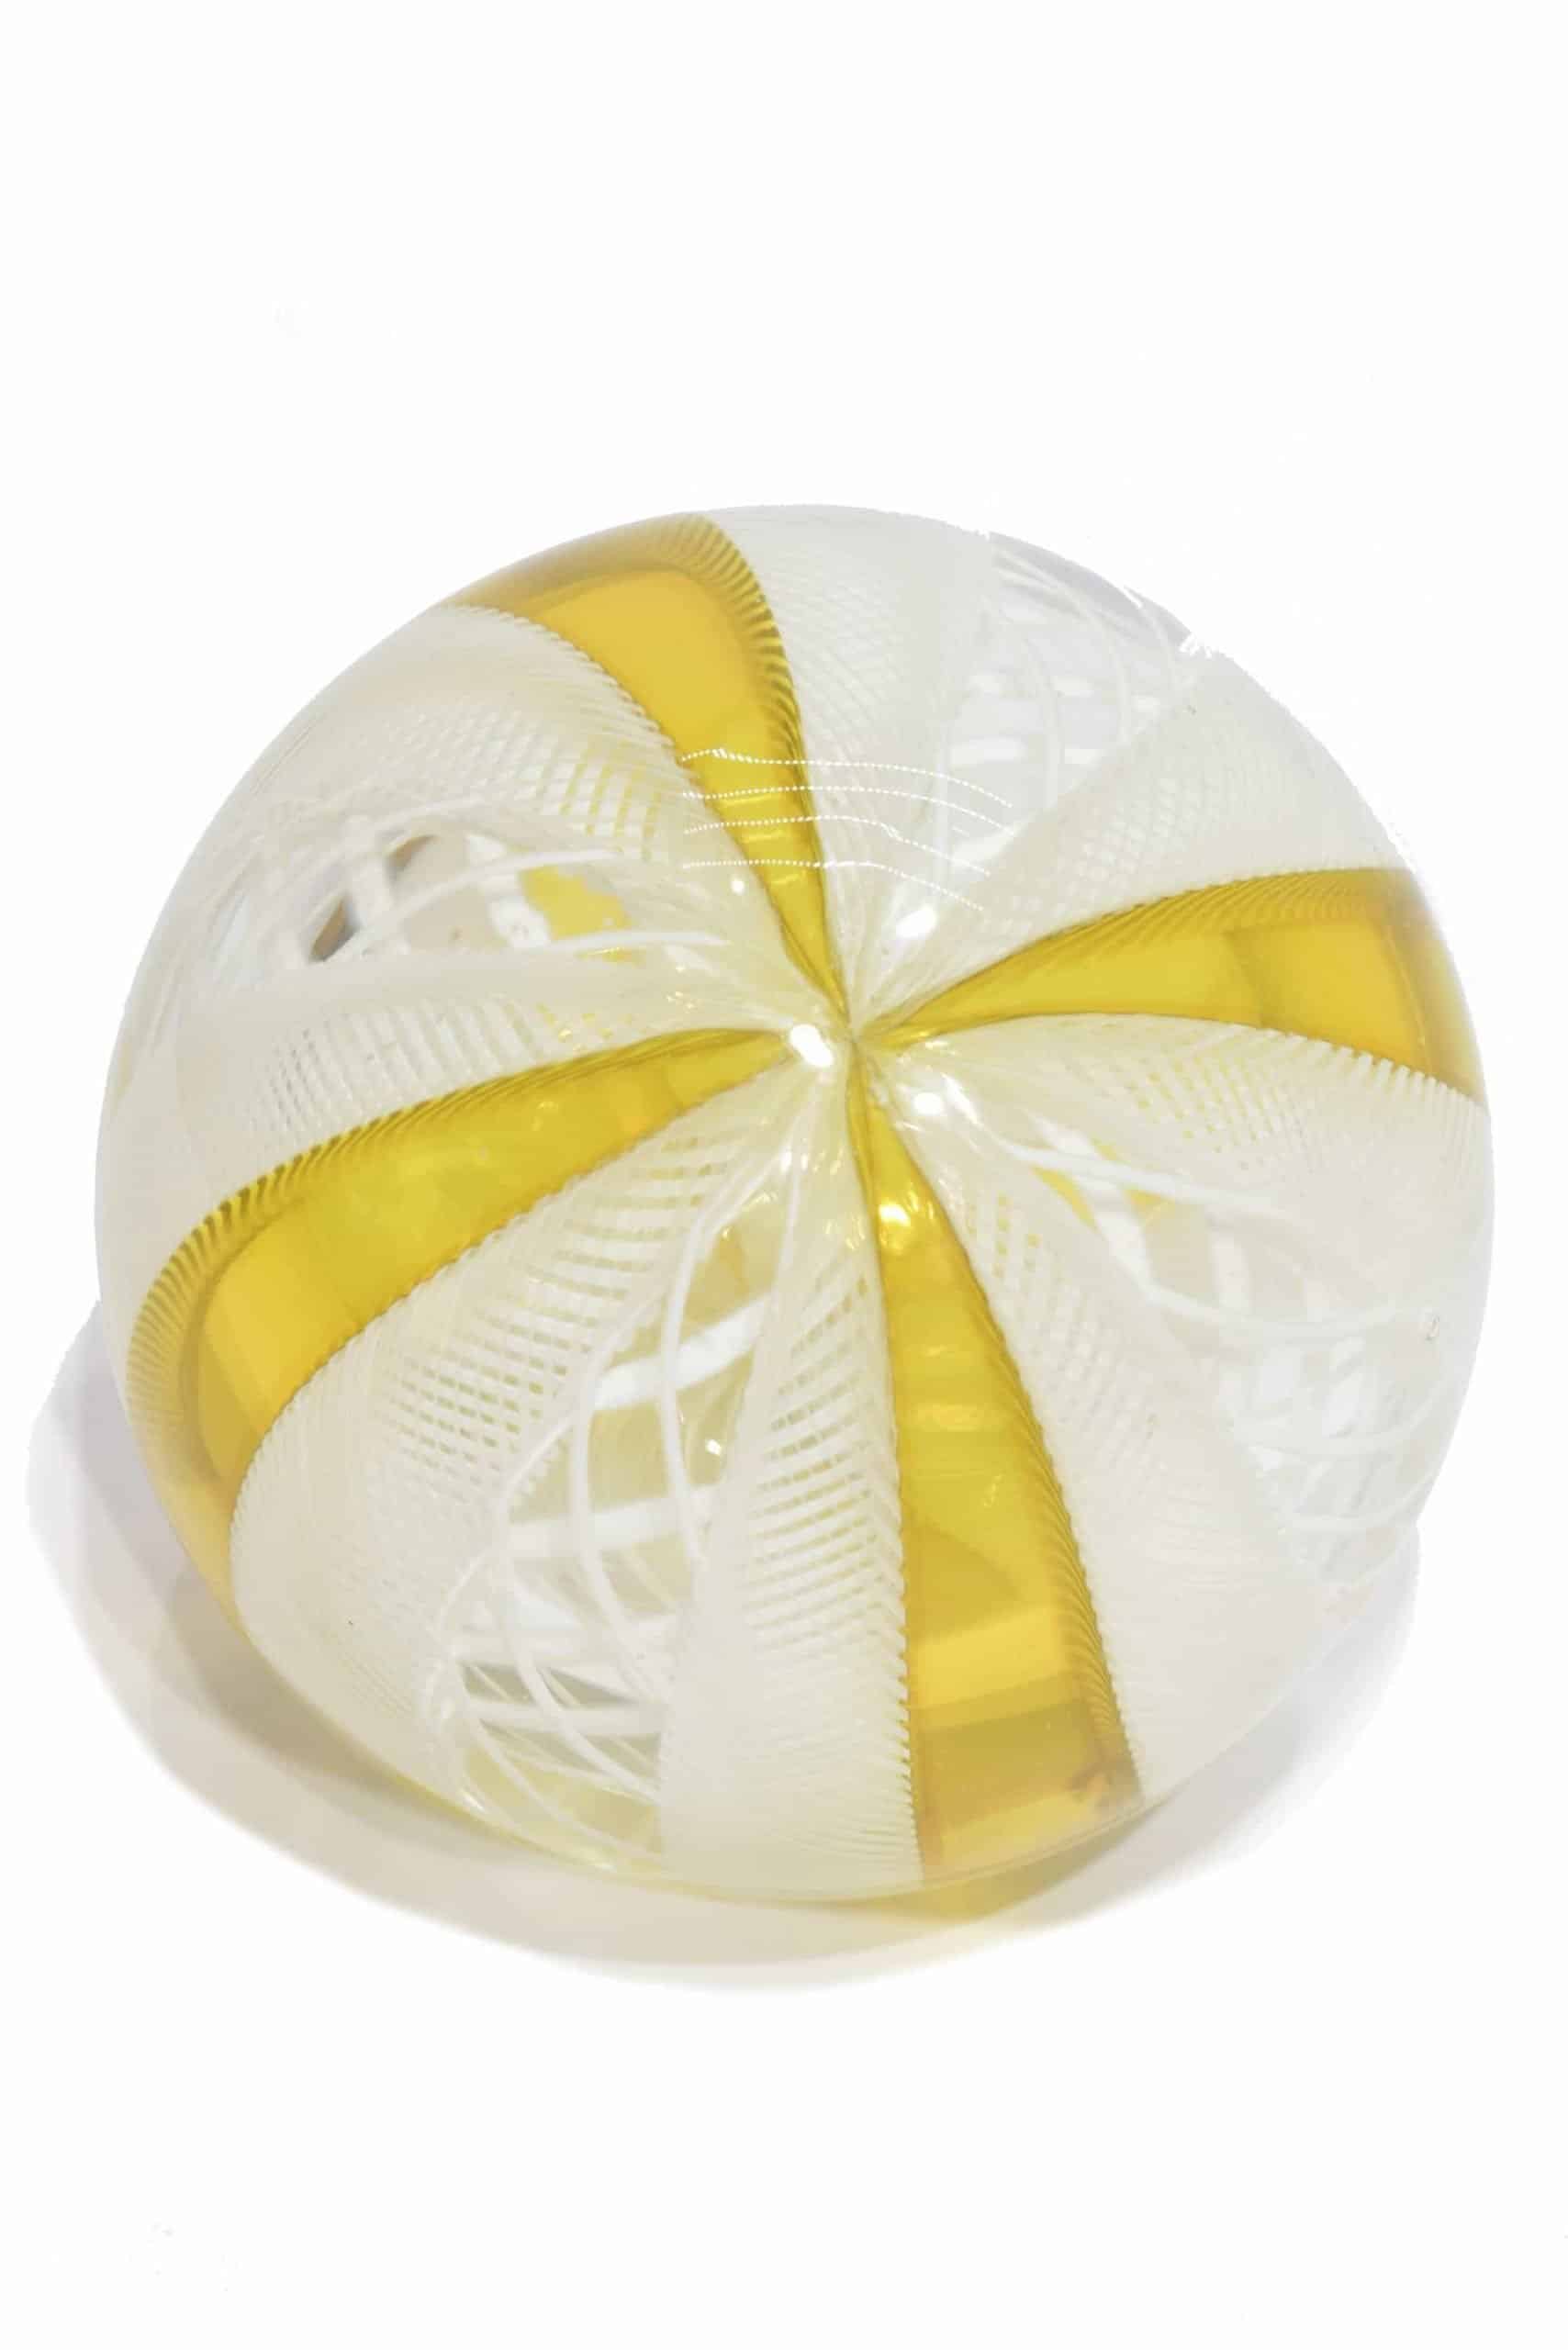 Murano glass paperweight glass vintage paperweight